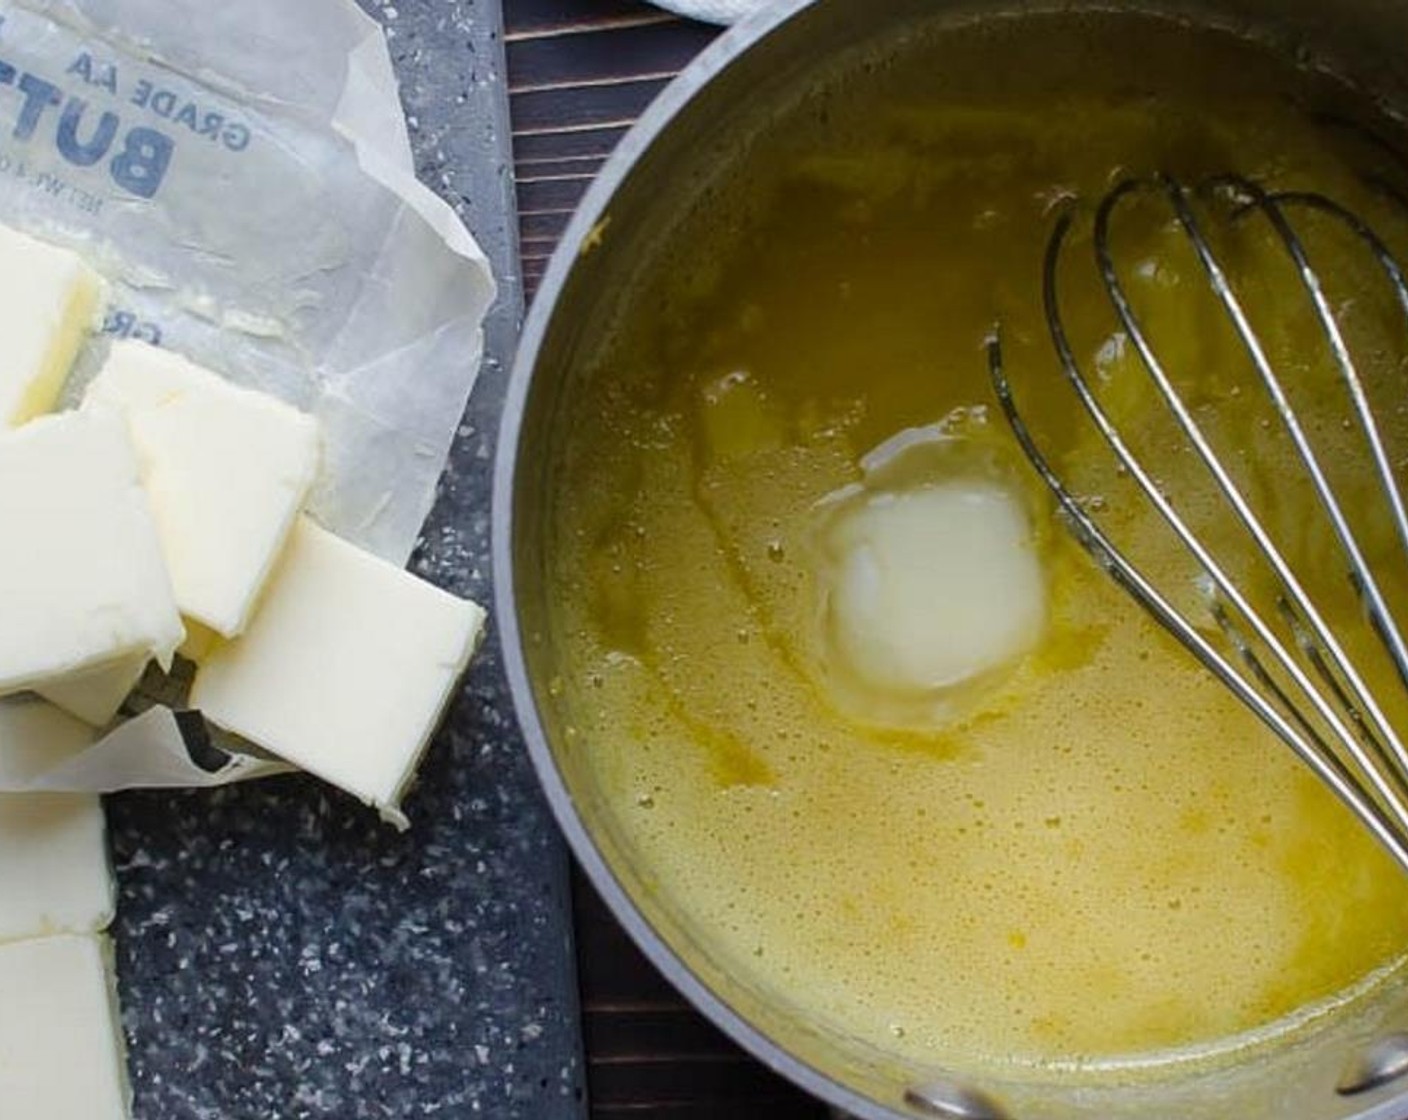 step 9 Add one tablespoon of Unsalted Butter (1/2 cup) and whisk until it completely melts and is incorporated before adding another tablespoon of butter. Continue in this manner until you've used all the butter.